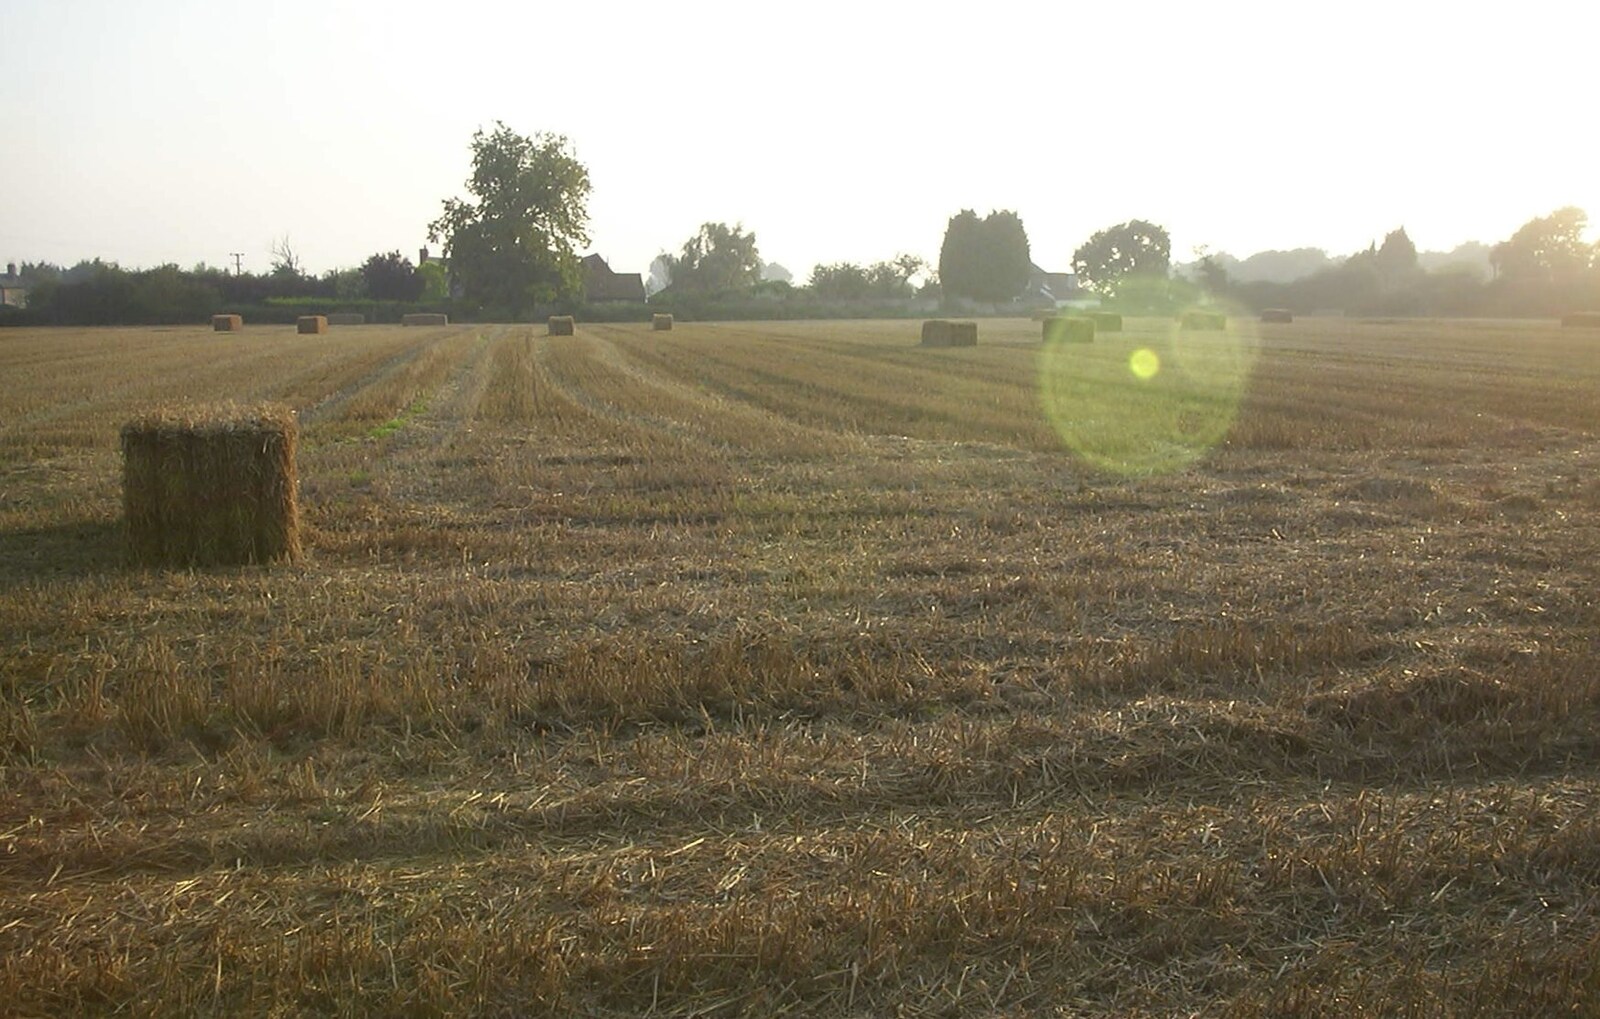 The side field has been cut and baled from 3G Lab Moves Offices, Milton Road, Cambourne and Cambridge - 27th August 2001